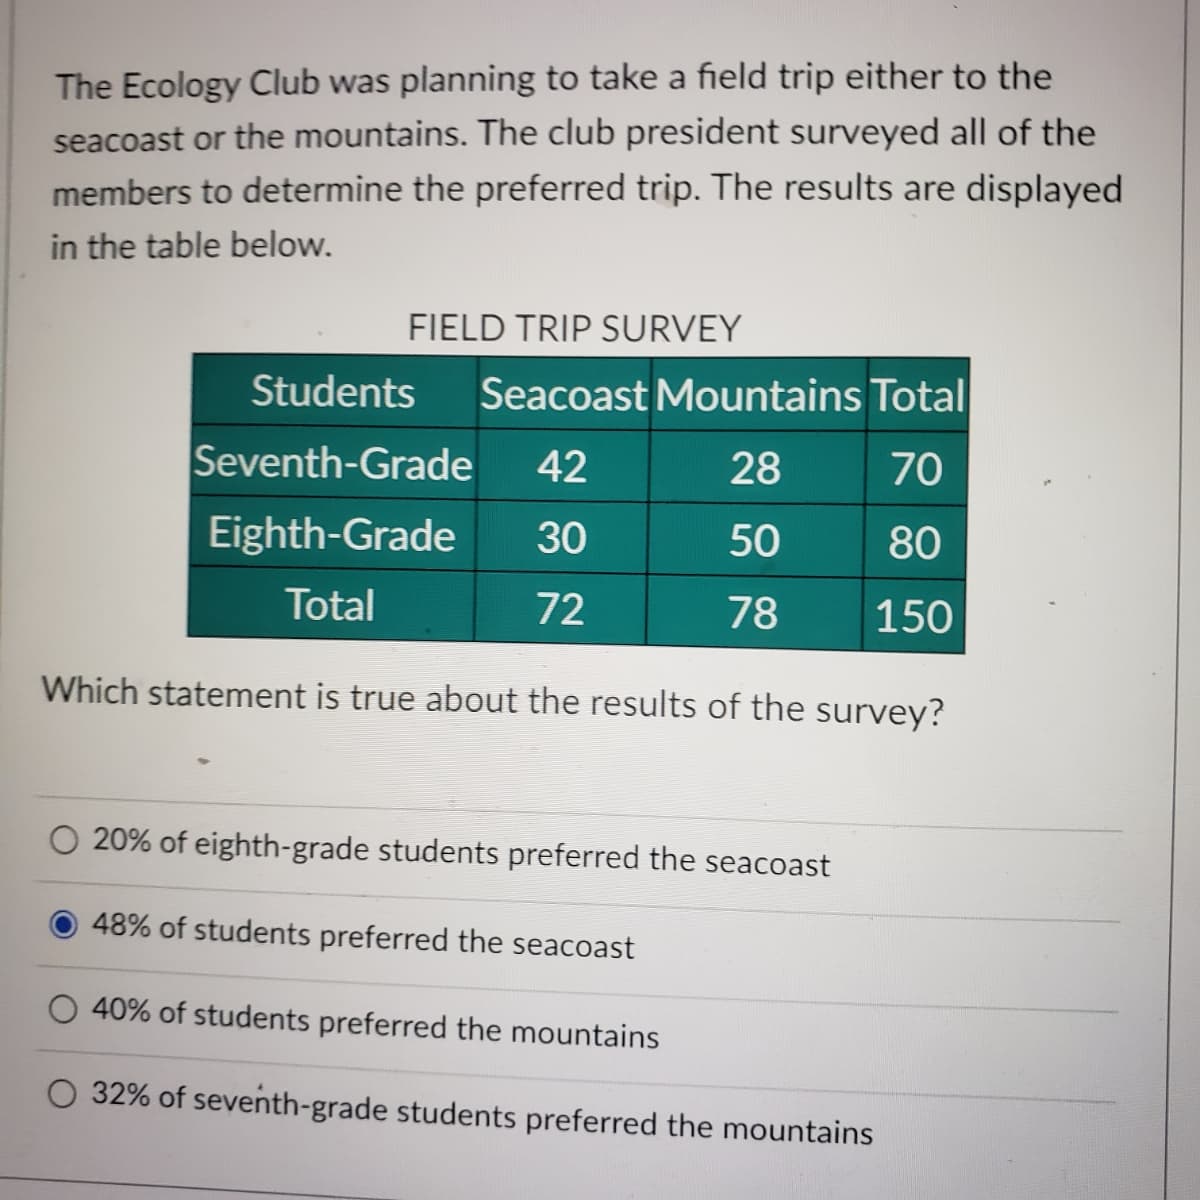 The Ecology Club was planning to take a field trip either to the
seacoast or the mountains. The club president surveyed all of the
members to determine the preferred trip. The results are displayed
in the table below.
FIELD TRIP SURVEY
Students
Seacoast Mountains Total
Seventh-Grade
42
28
70
Eighth-Grade
30
50
80
Total
72
78
150
Which statement is true about the results of the survey?
O 20% of eighth-grade students preferred the seacoast
48% of students preferred the seacoast
40% of students preferred the mountains
O 32% of seventh-grade students preferred the mountains
